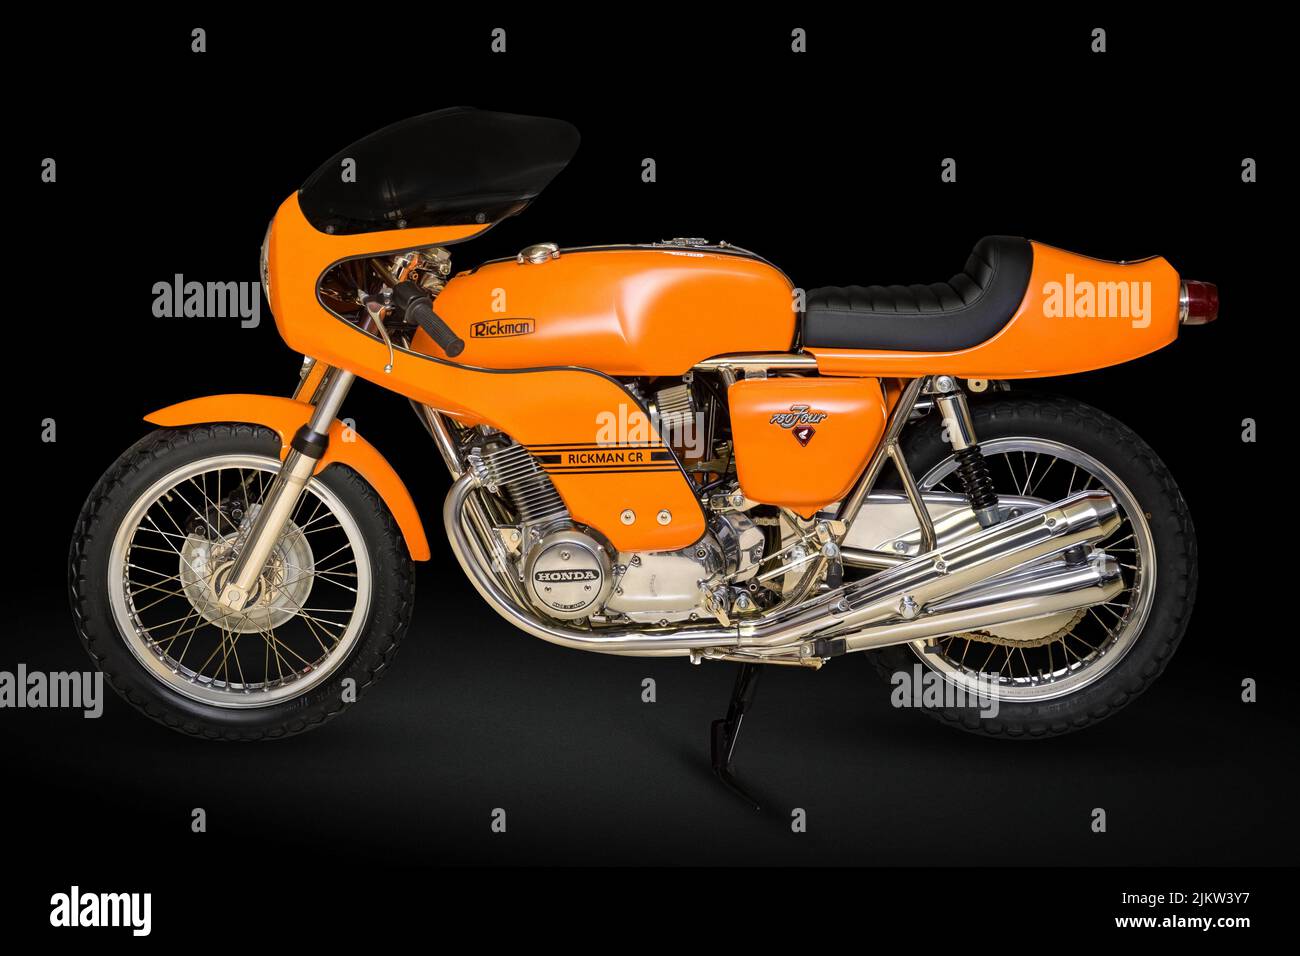 Beautifully restored vintage motorcycles Stock Photo